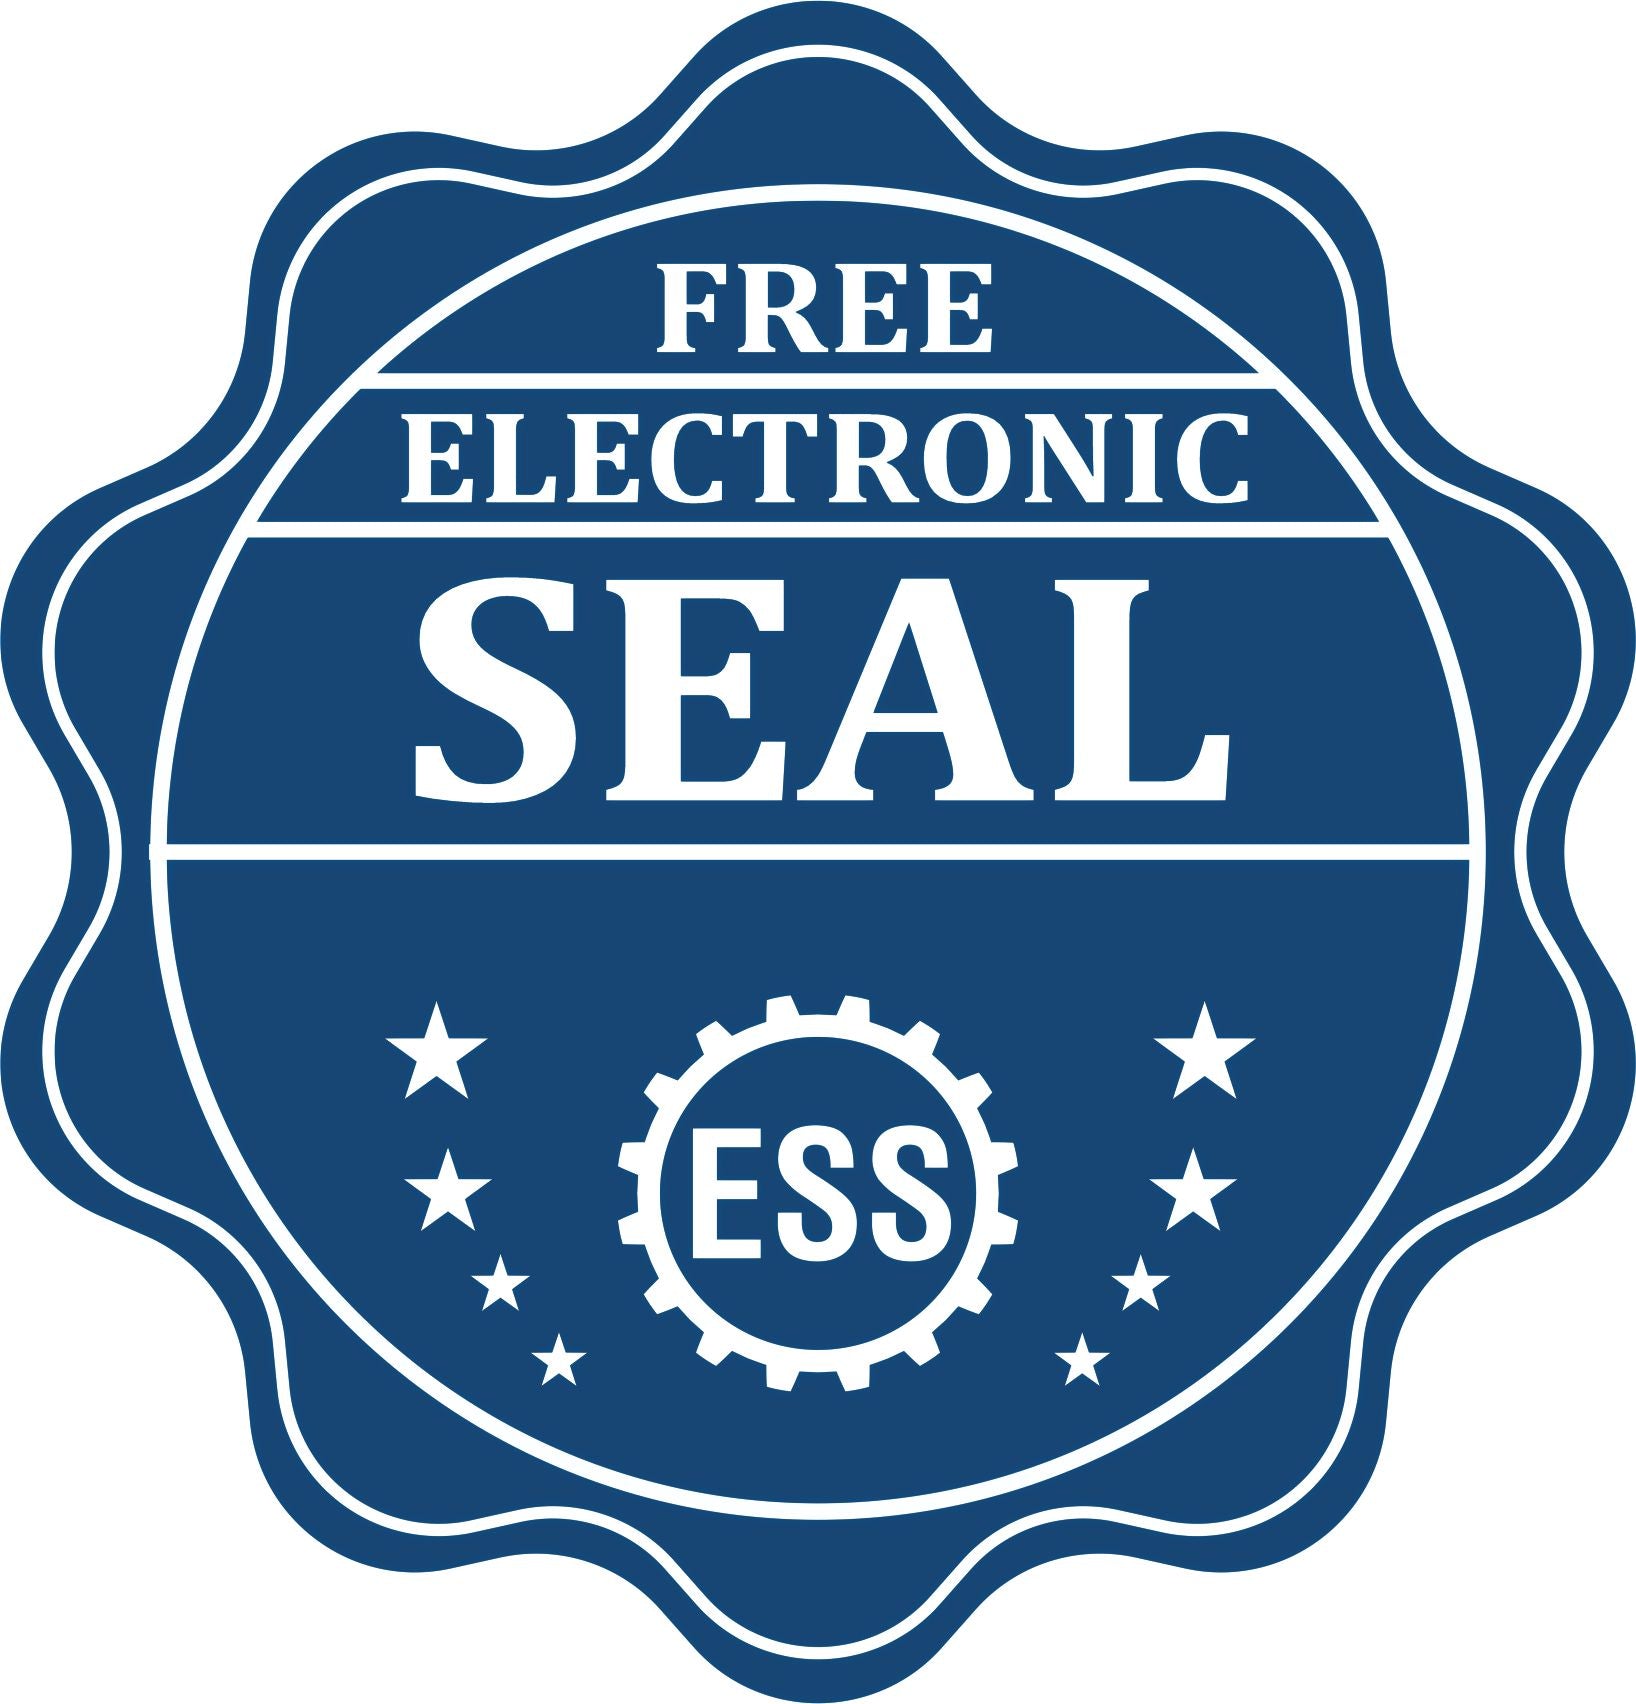 A badge showing a free electronic seal for the Slim Pre-Inked Maryland Architect Seal Stamp with stars and the ESS gear on the emblem.